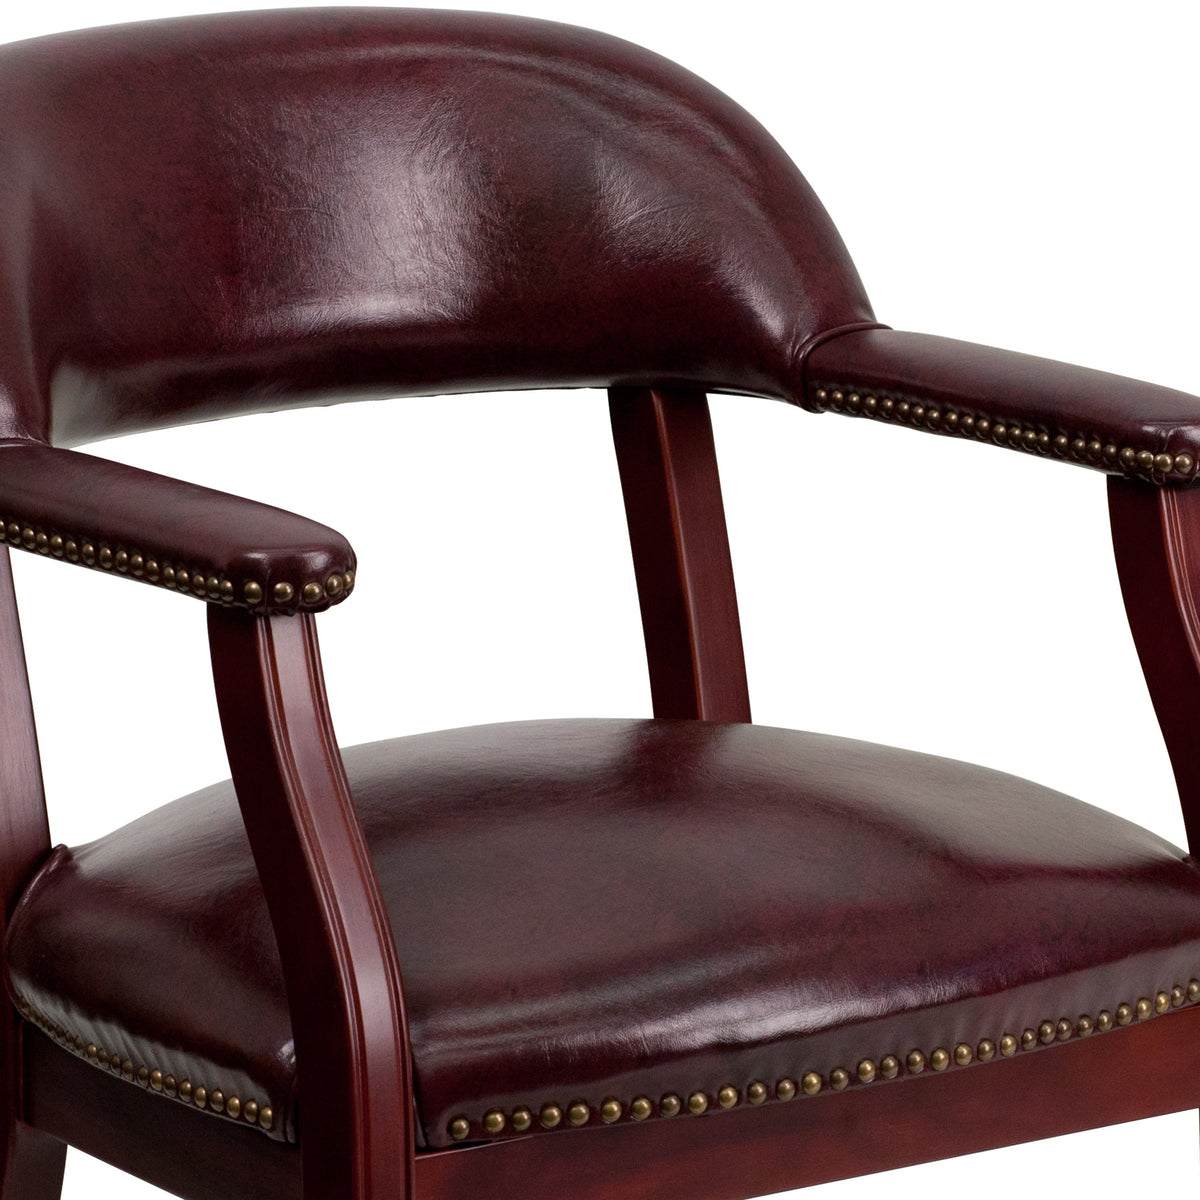 Oxblood Vinyl |#| Oxblood Vinyl Luxurious Conference Chair with Accent Nail Trim and Casters